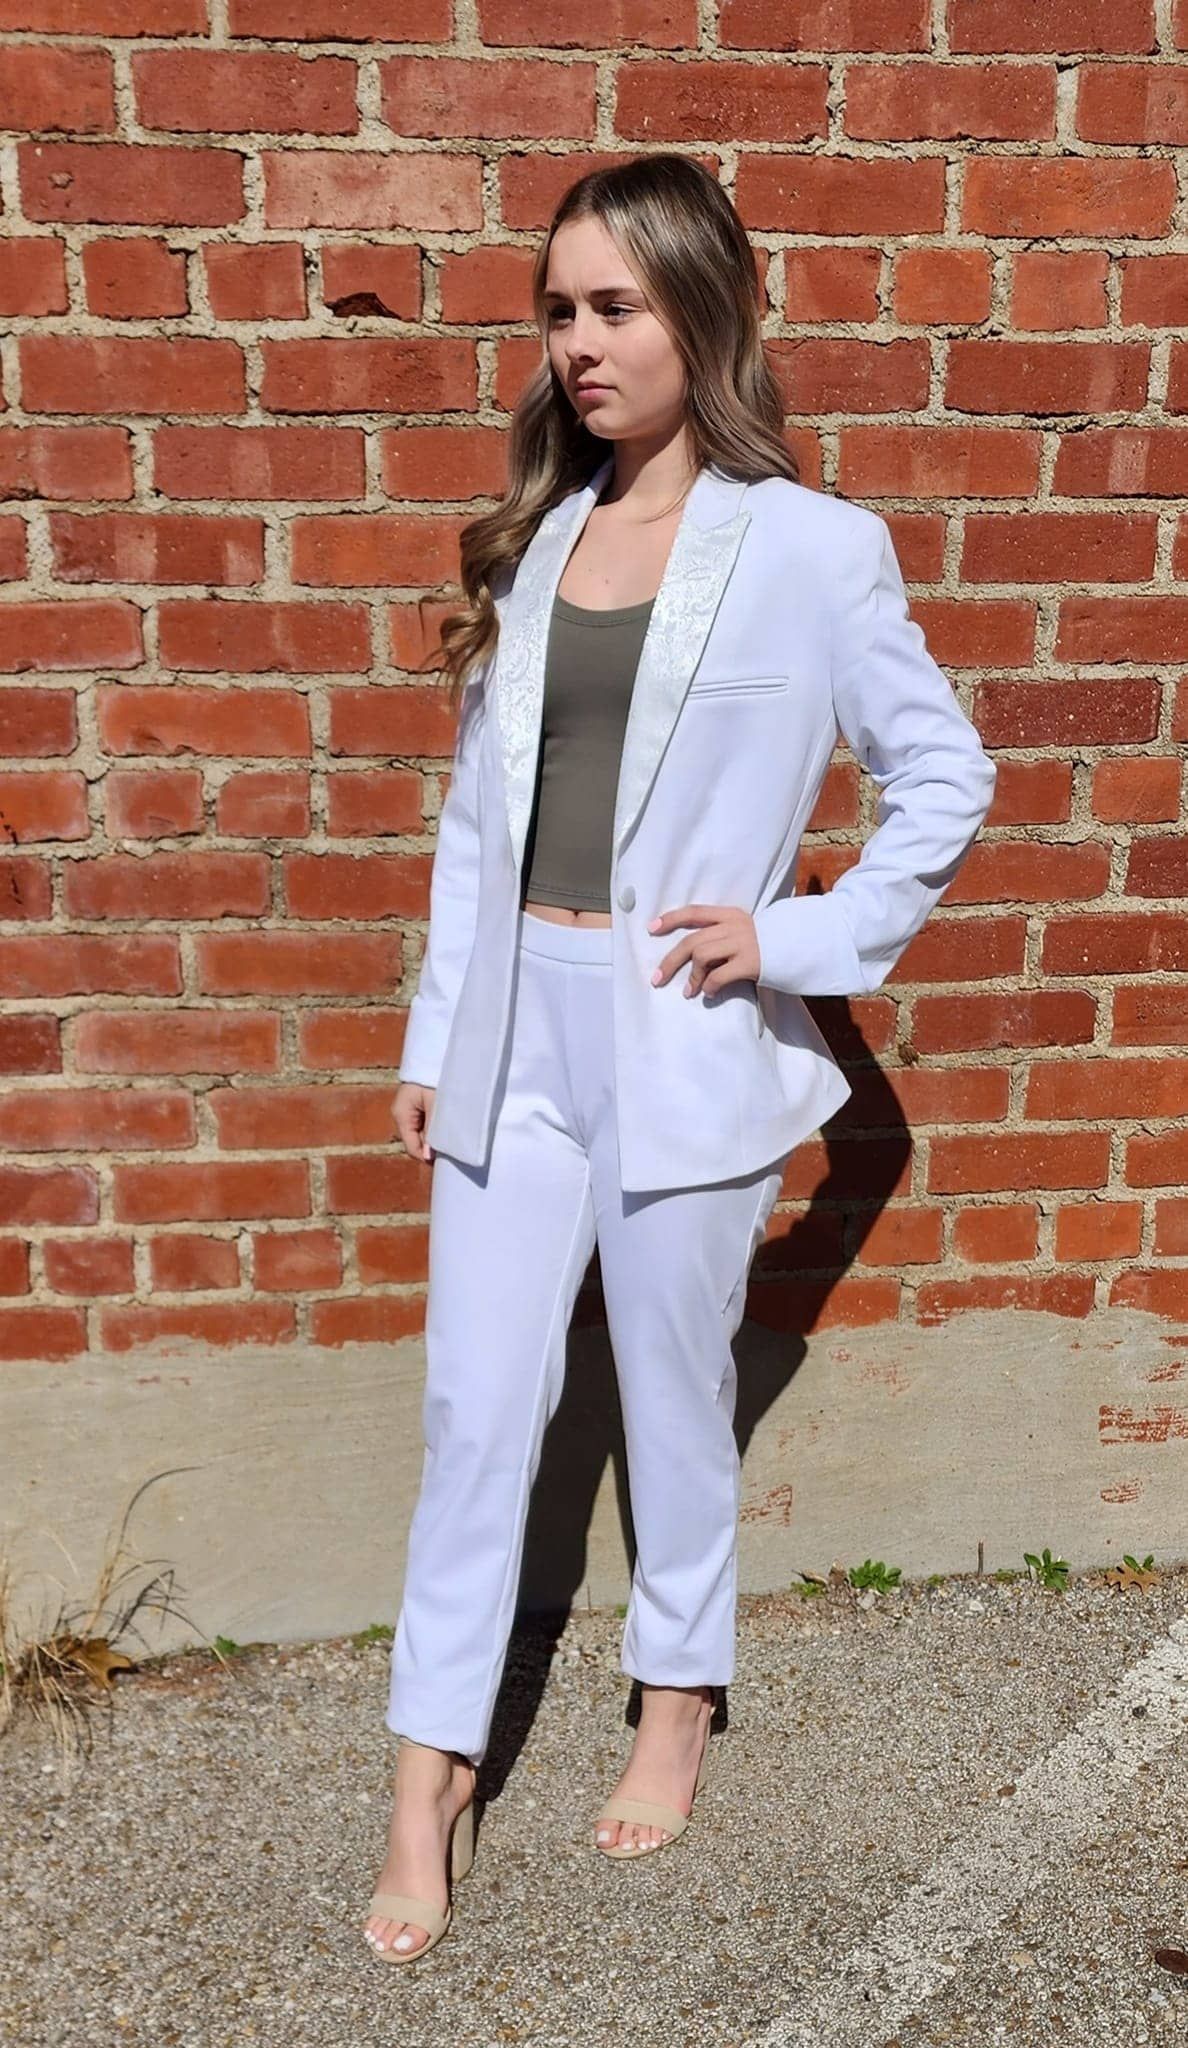 young lady standing by brick wall in rented formal wear